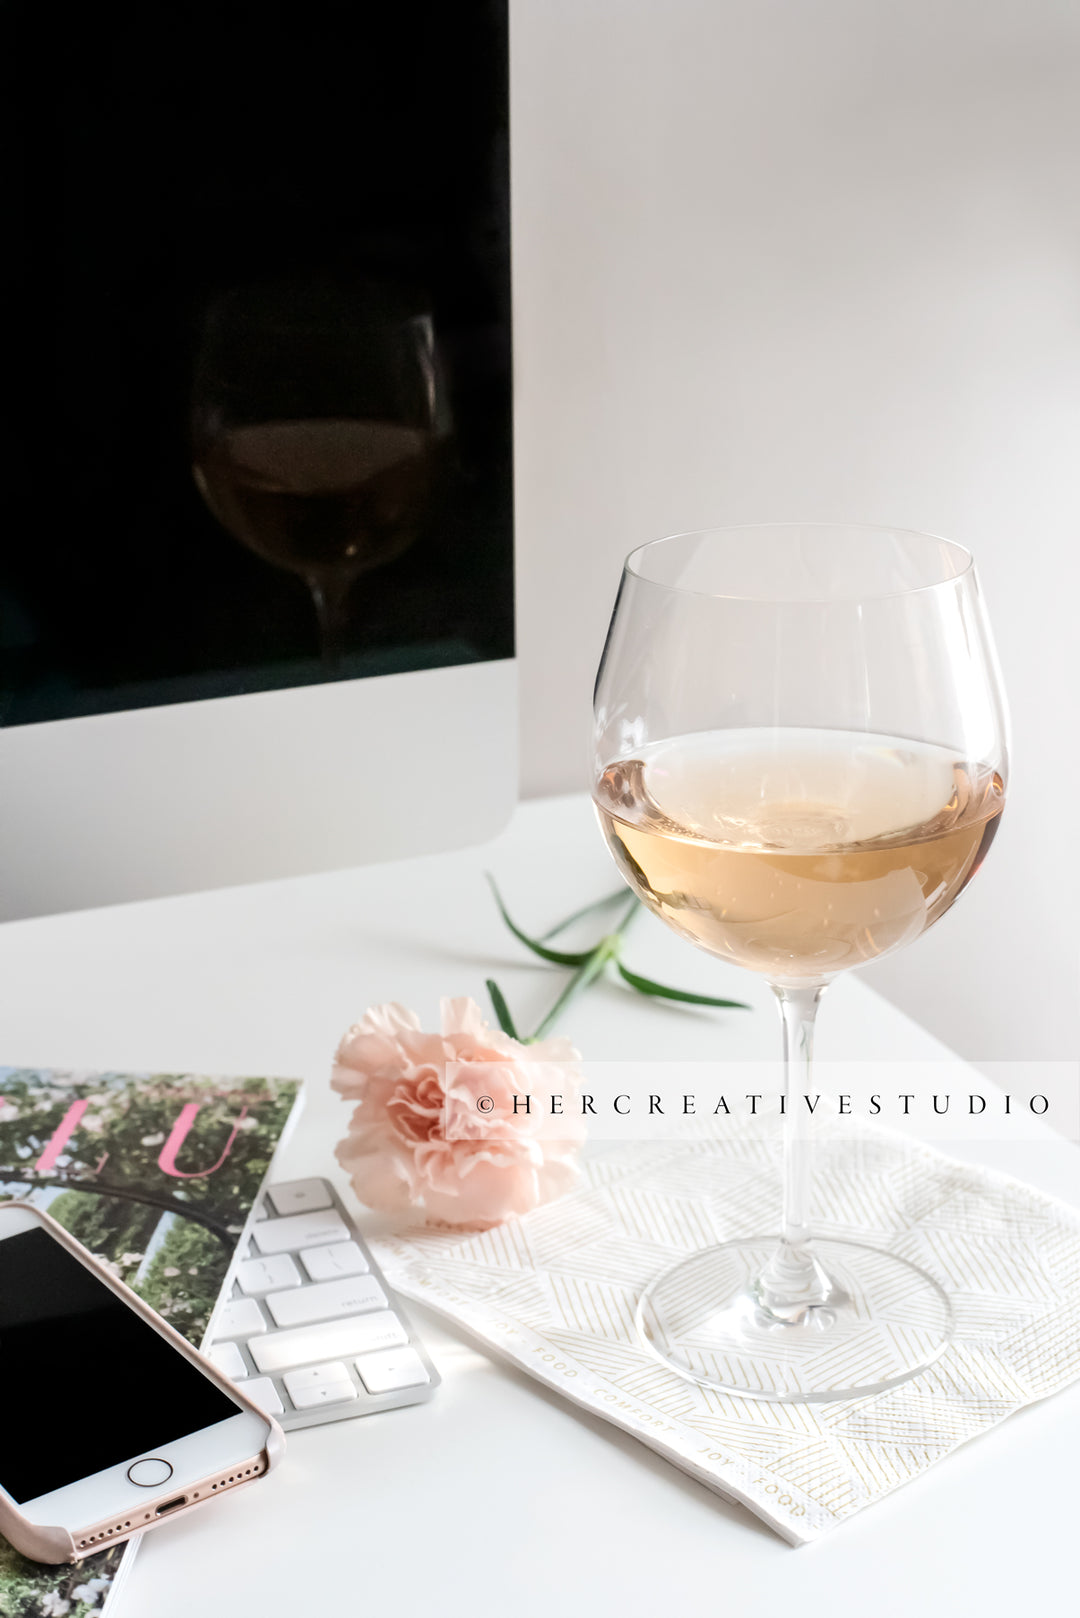 Glass of Wine on Workspace, Styled Image